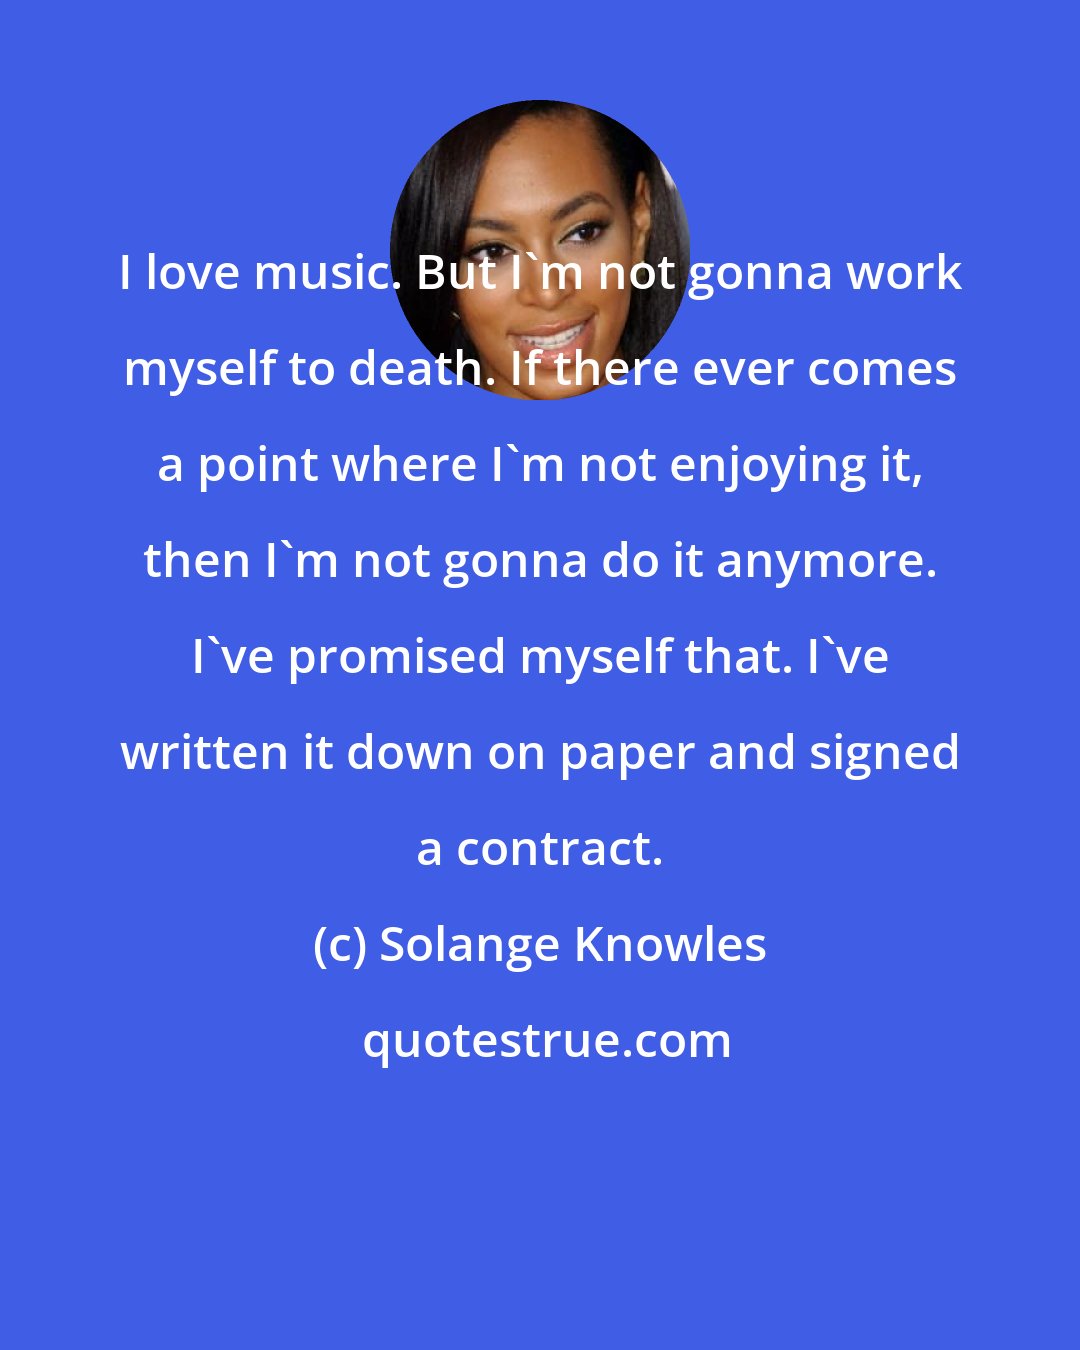 Solange Knowles: I love music. But I'm not gonna work myself to death. If there ever comes a point where I'm not enjoying it, then I'm not gonna do it anymore. I've promised myself that. I've written it down on paper and signed a contract.